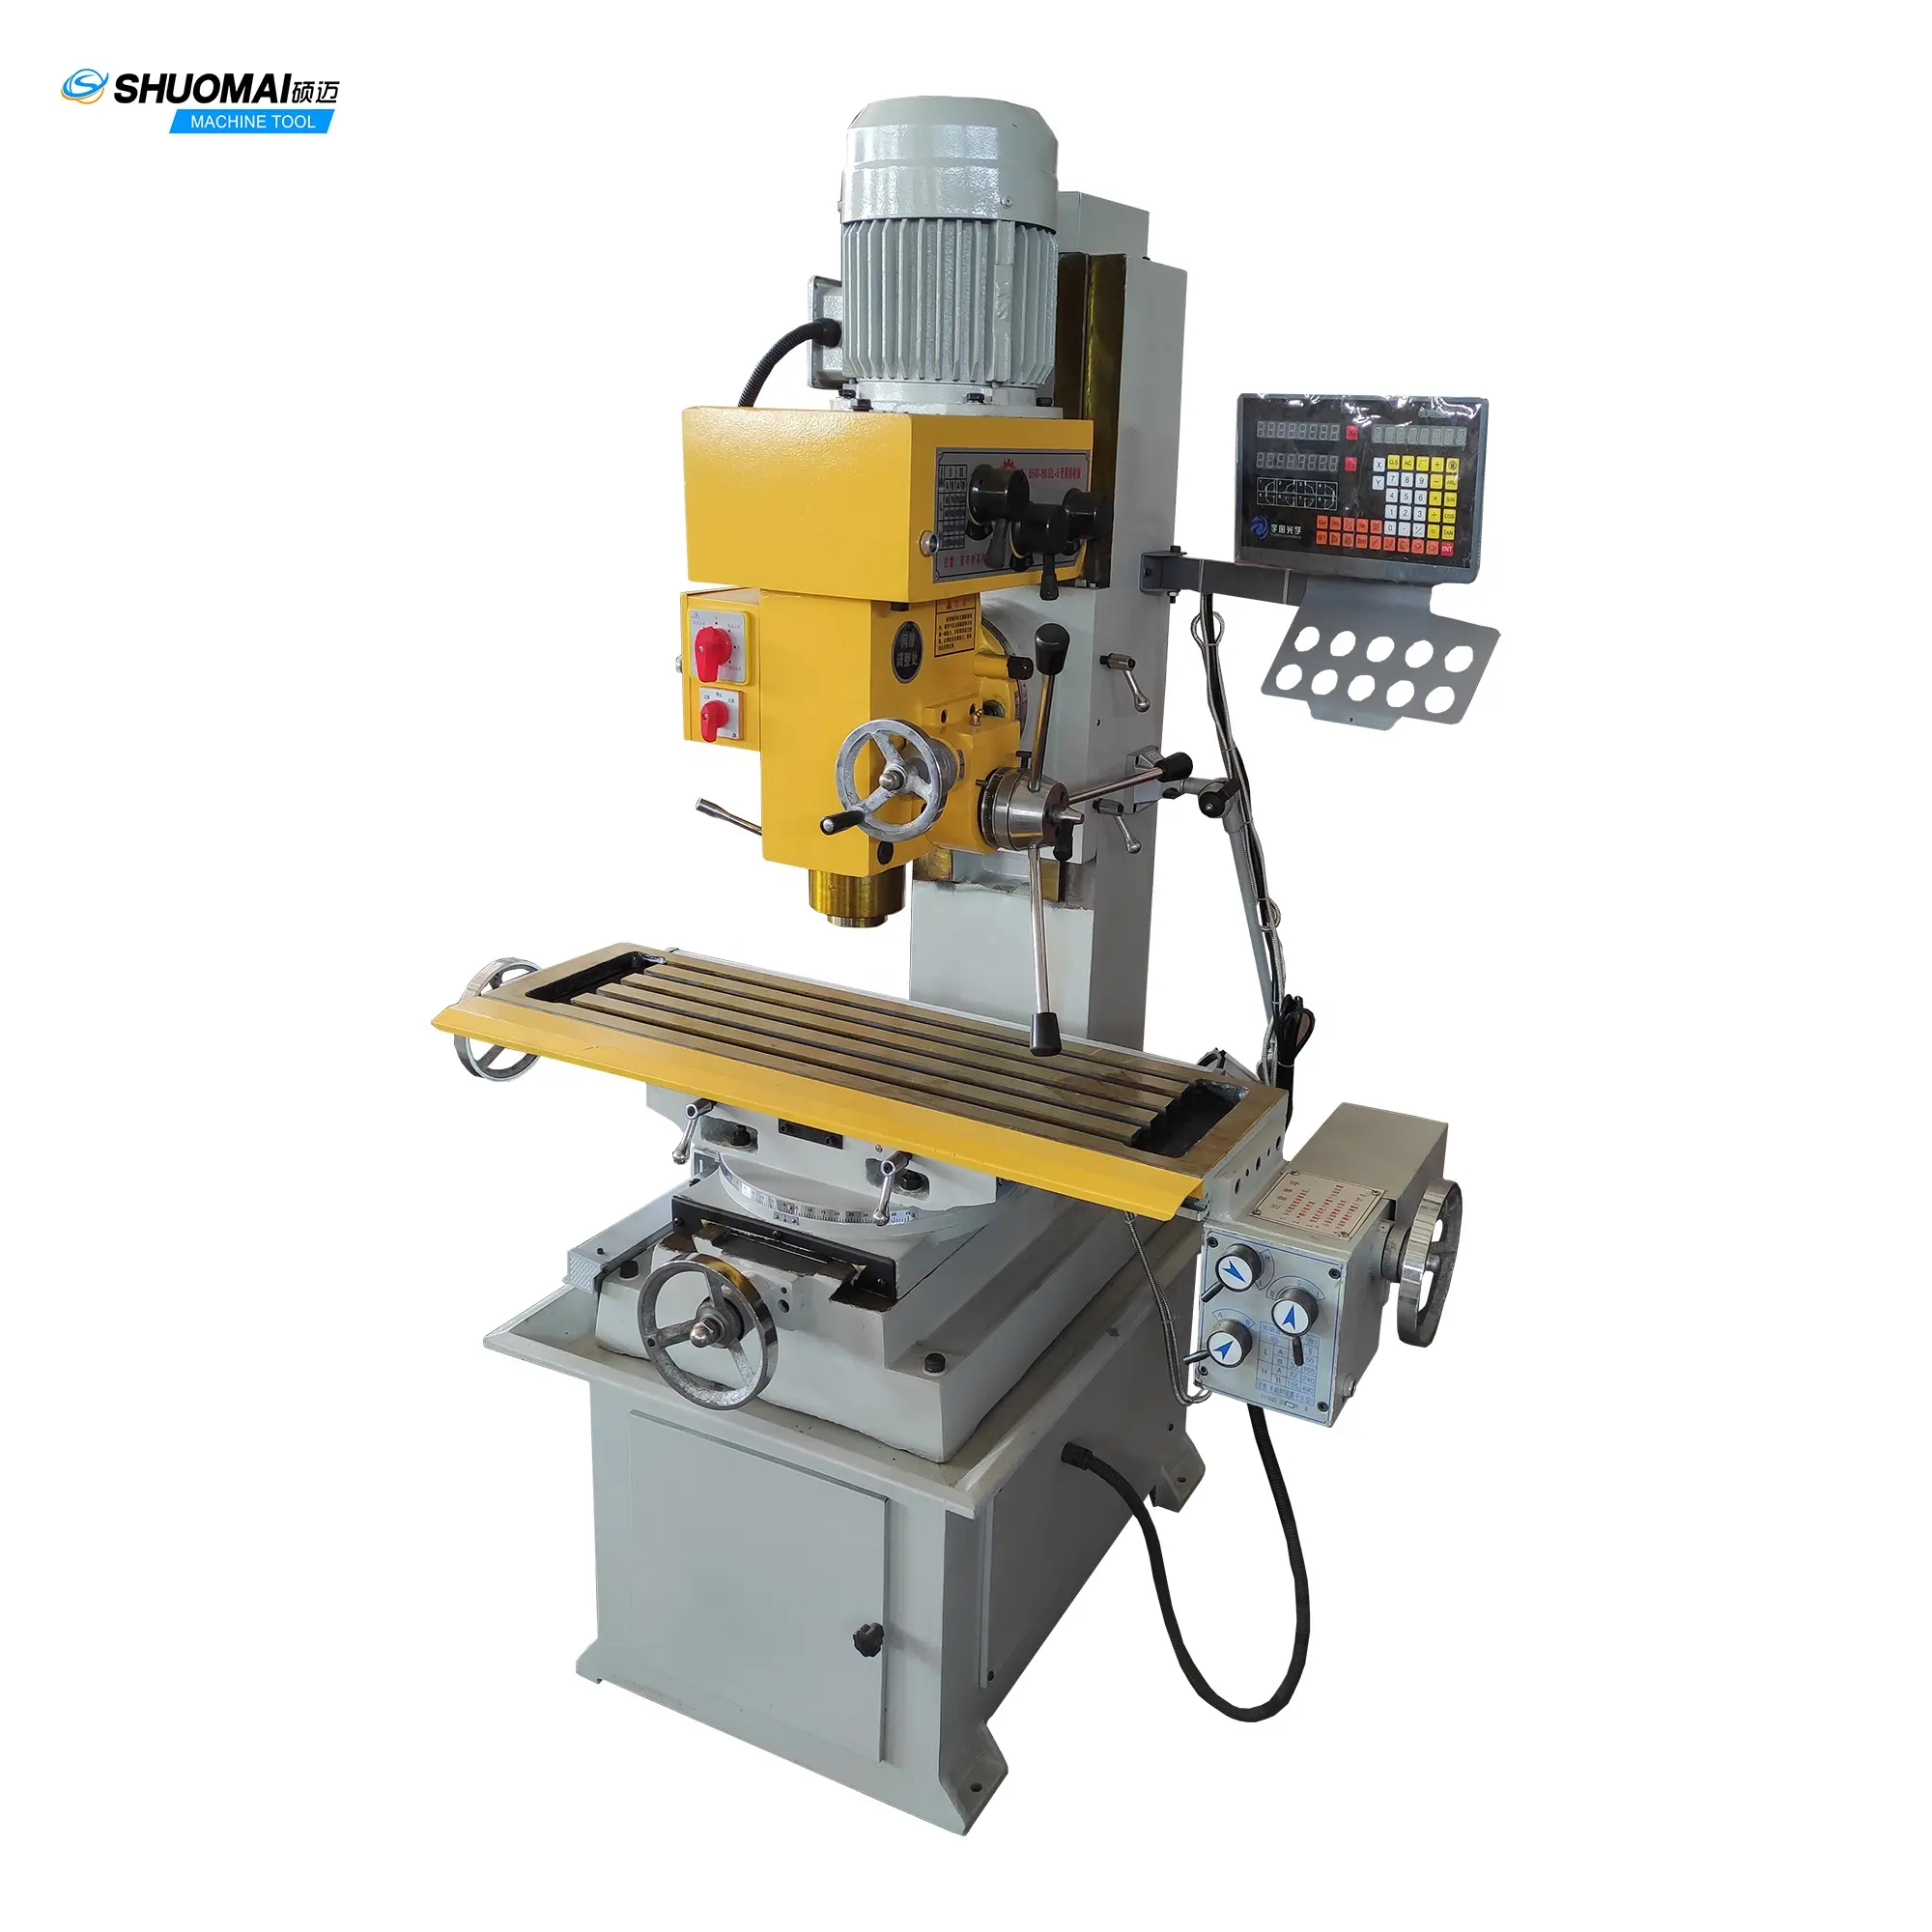 ZX50 ZX50C vertical universal manual mill drill metal milling and drilling machine